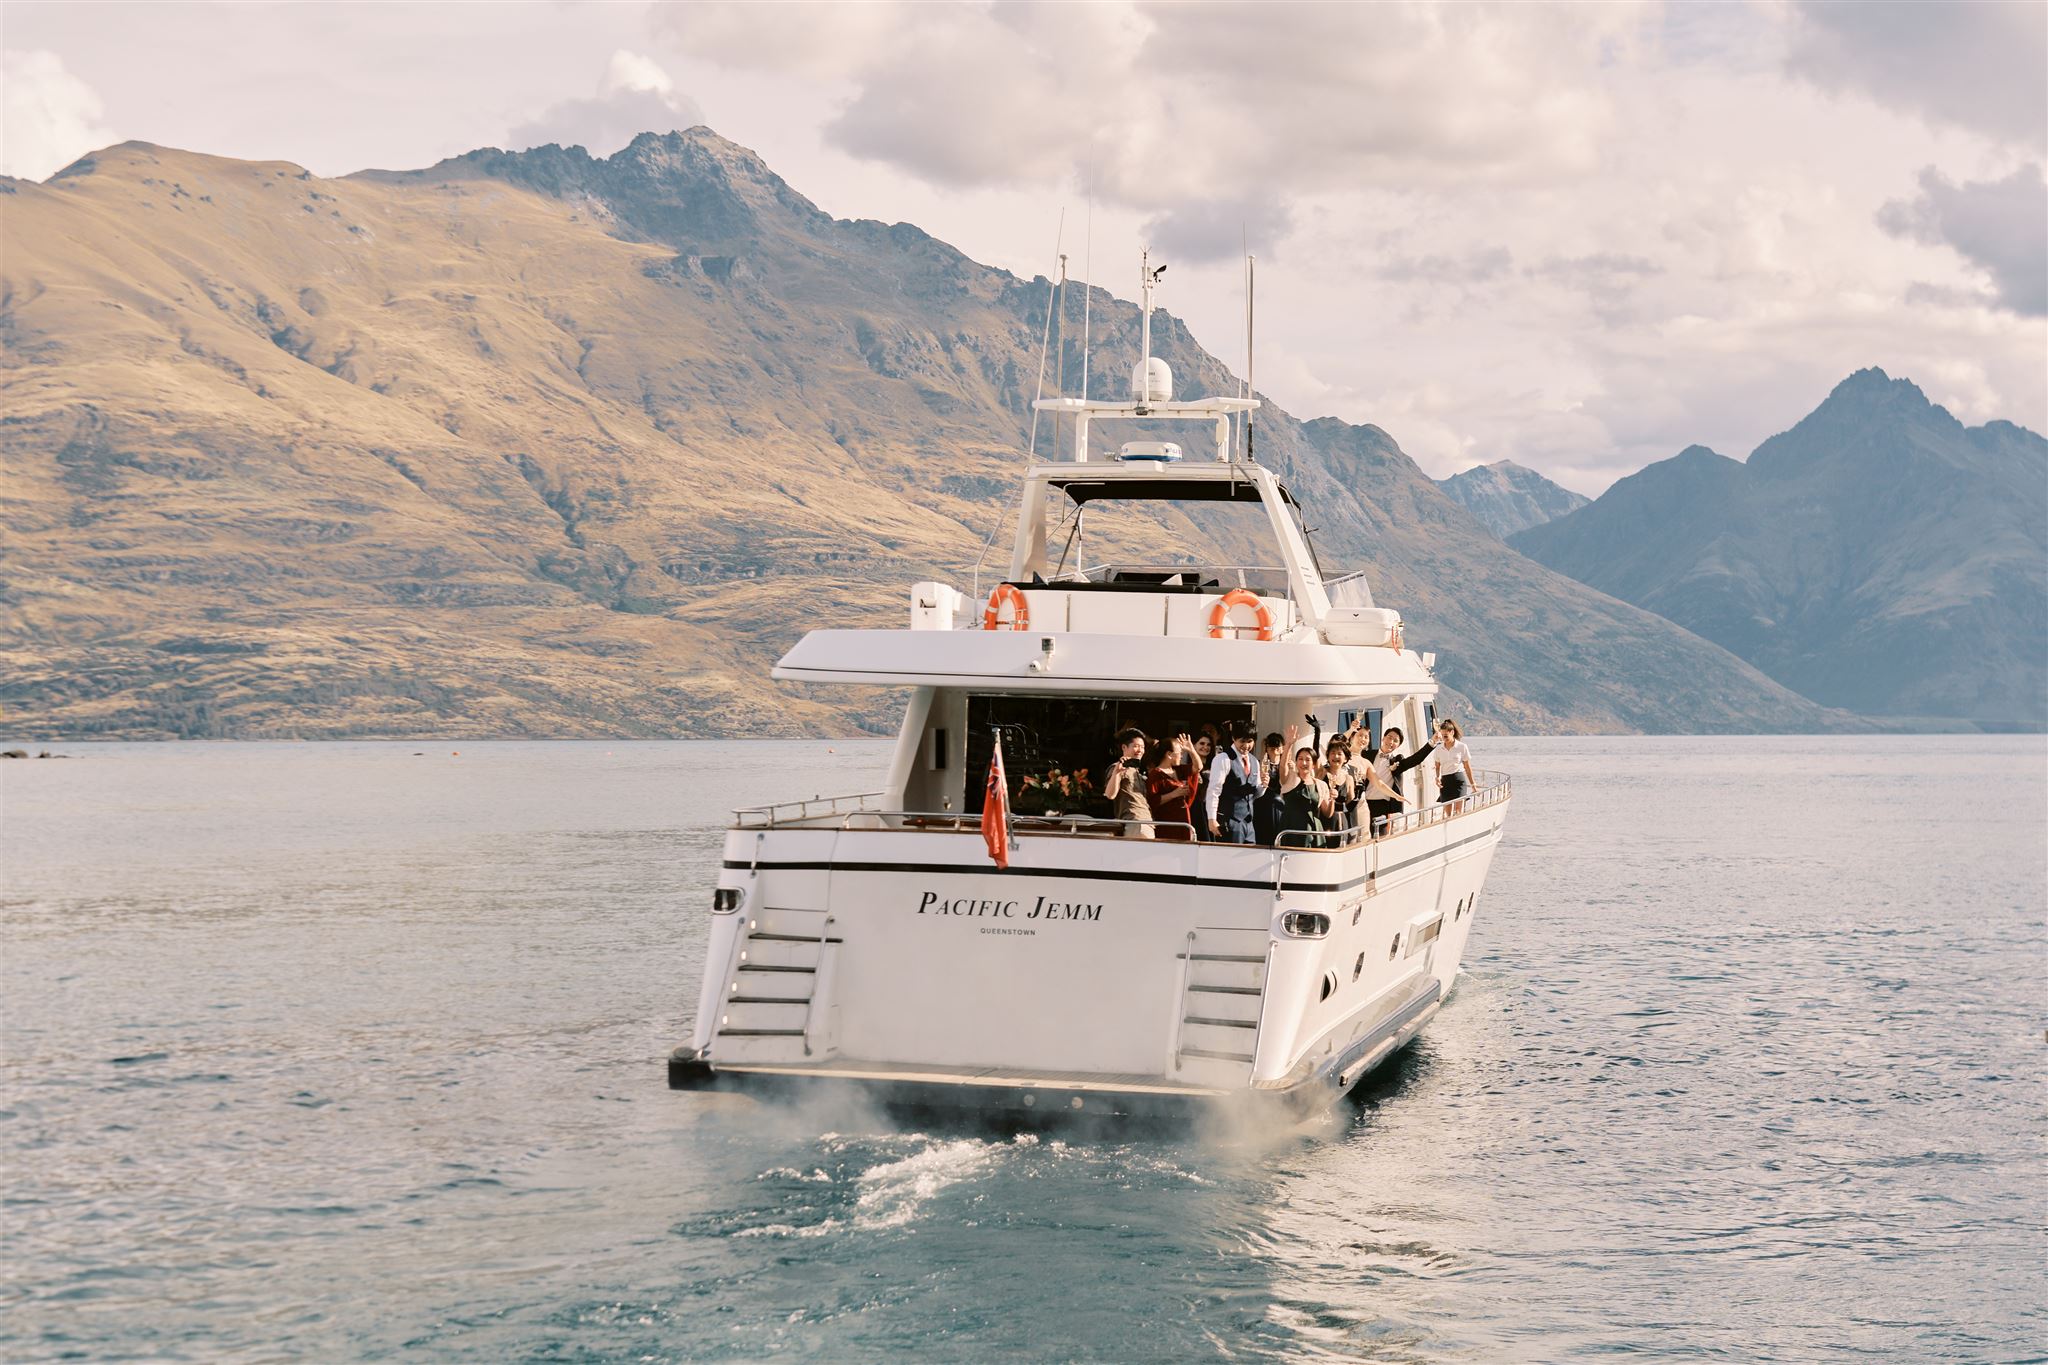 Queenstown New Zealand Heli Wedding Elopement Photographer クイーンズタウン　ニュージーランド　エロープメント 結婚式 | A group of passengers enjoying a boat tour on a cloudy day with majestic mountains in the background, captured by Yuri, the Queenstown Wedding Photographer.